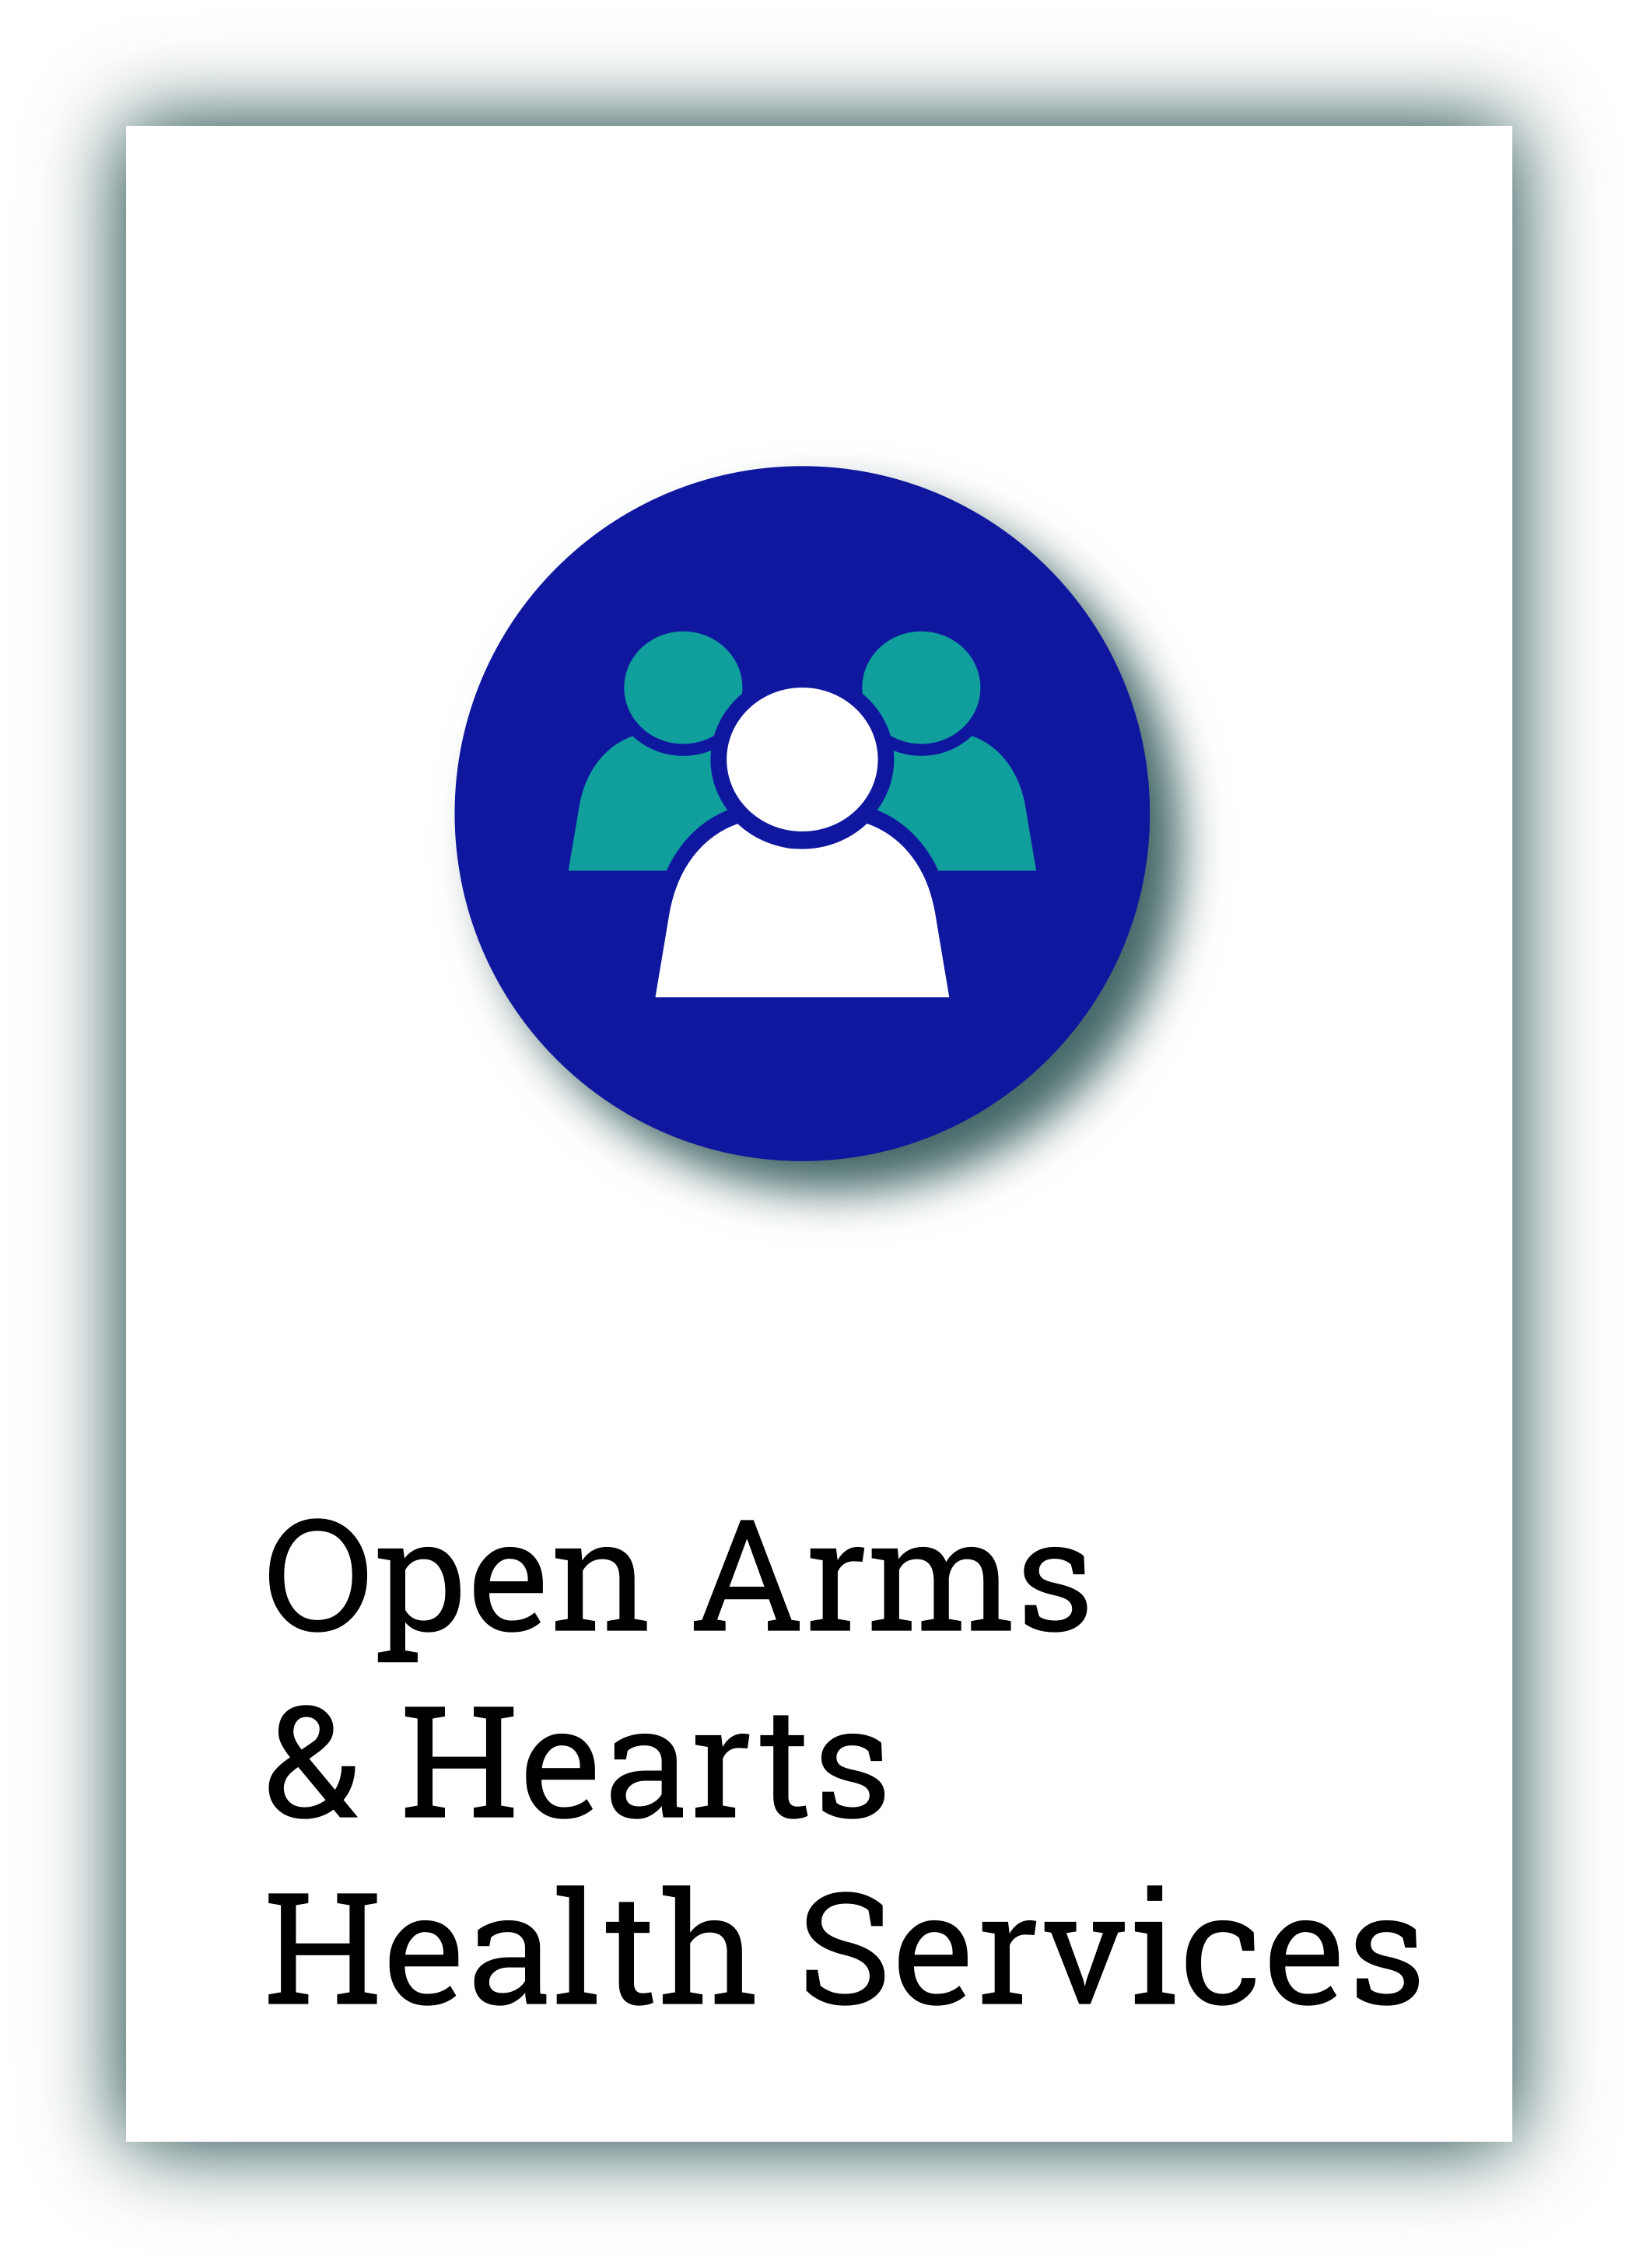 Open Arms & Hearts Health Services